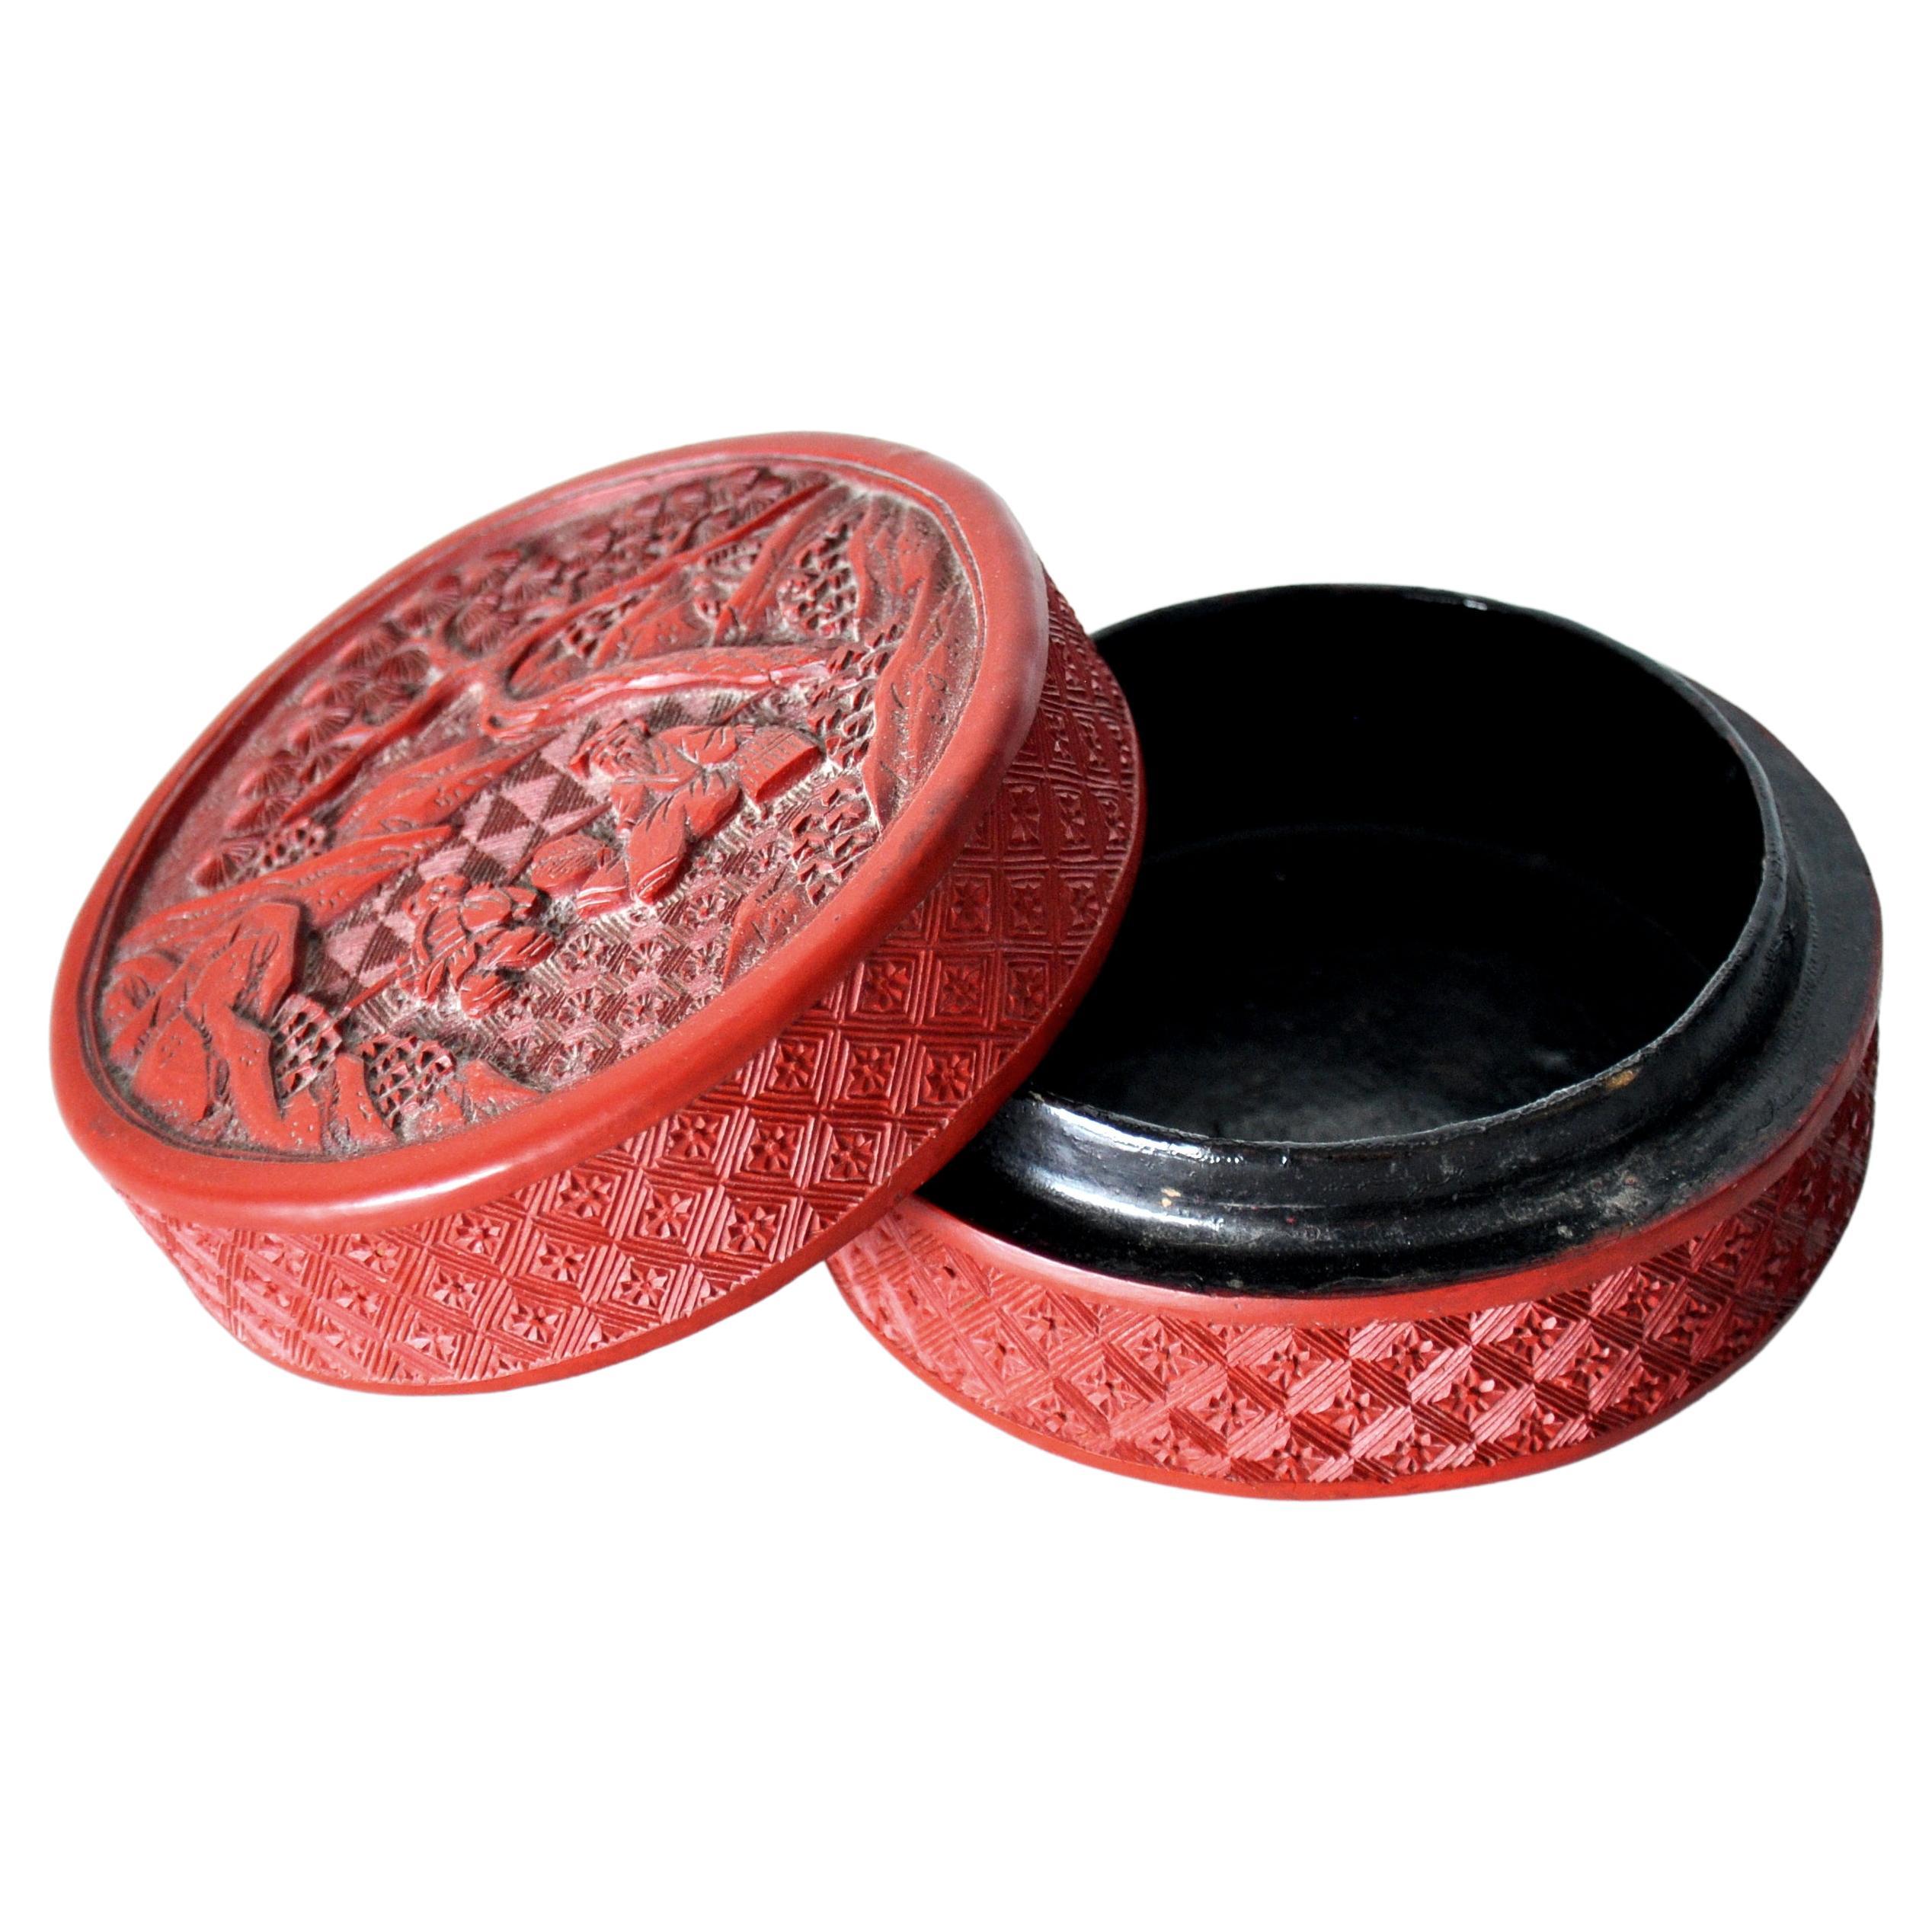 A fine antique Chinese red cinnabar lacquer lidded round box carved with a scene with a young boy and a seated elderly bearded sage within a rocky landscape with trees. The 